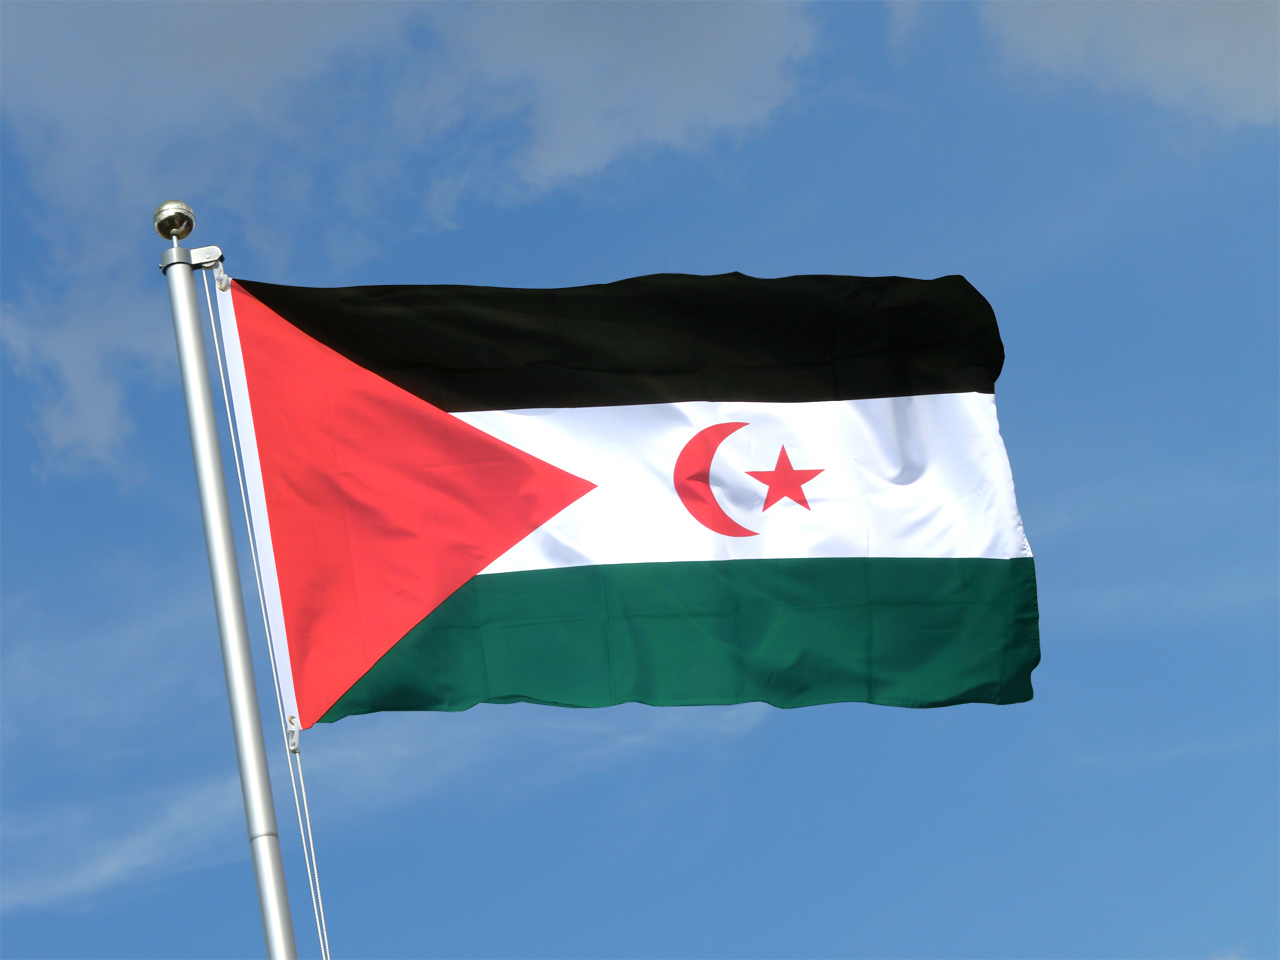 Western Sahara Flag For Sale Buy Online At Royal Flags